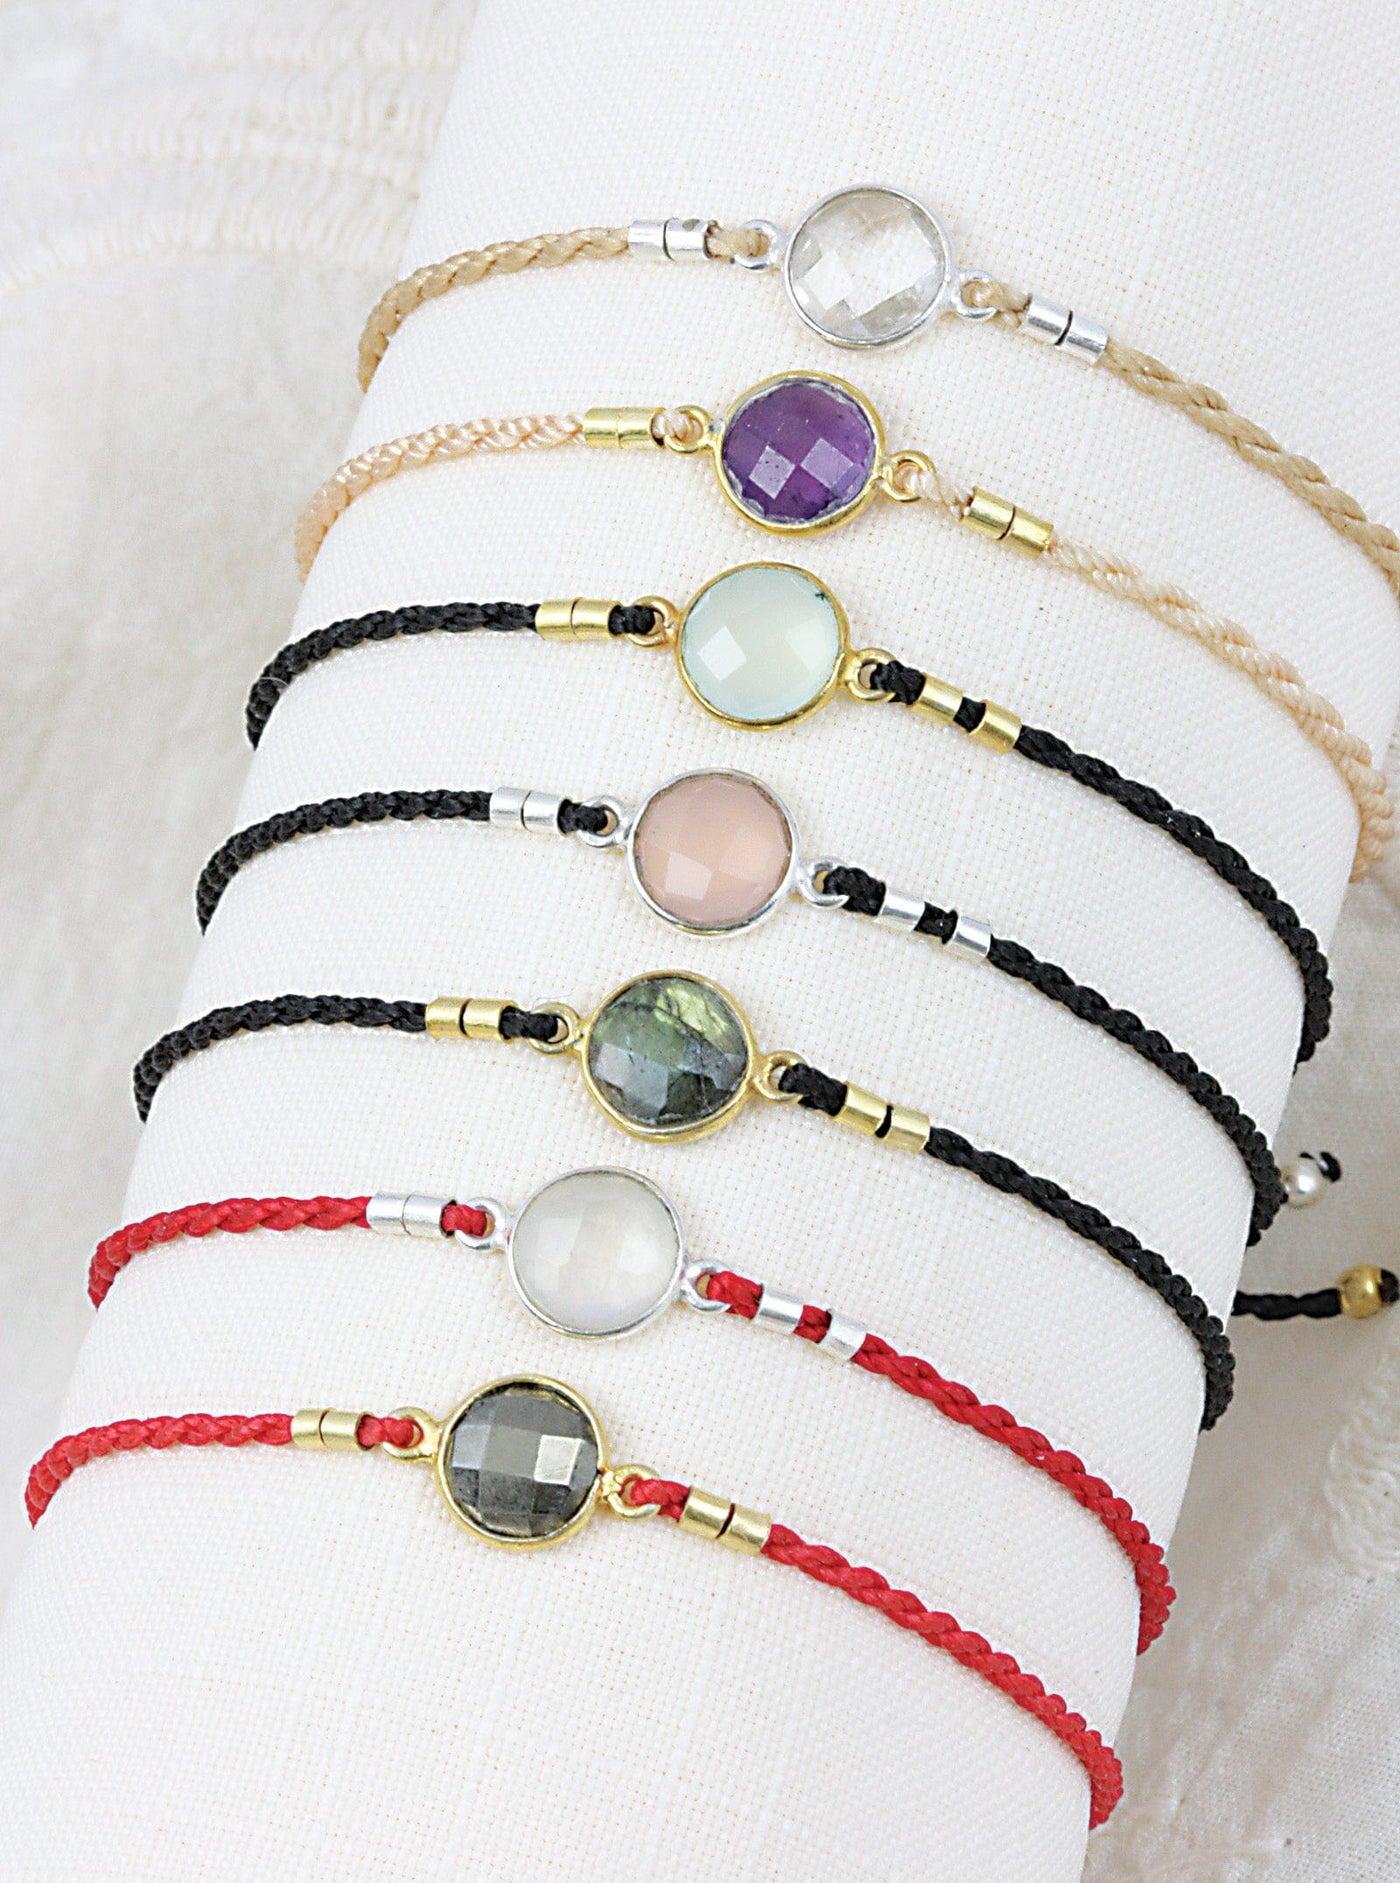 Gemstone Bezel Bracelets - Adjustable Cord with Gold or Silver Plated Accents, showing the black, cording with the different stones available